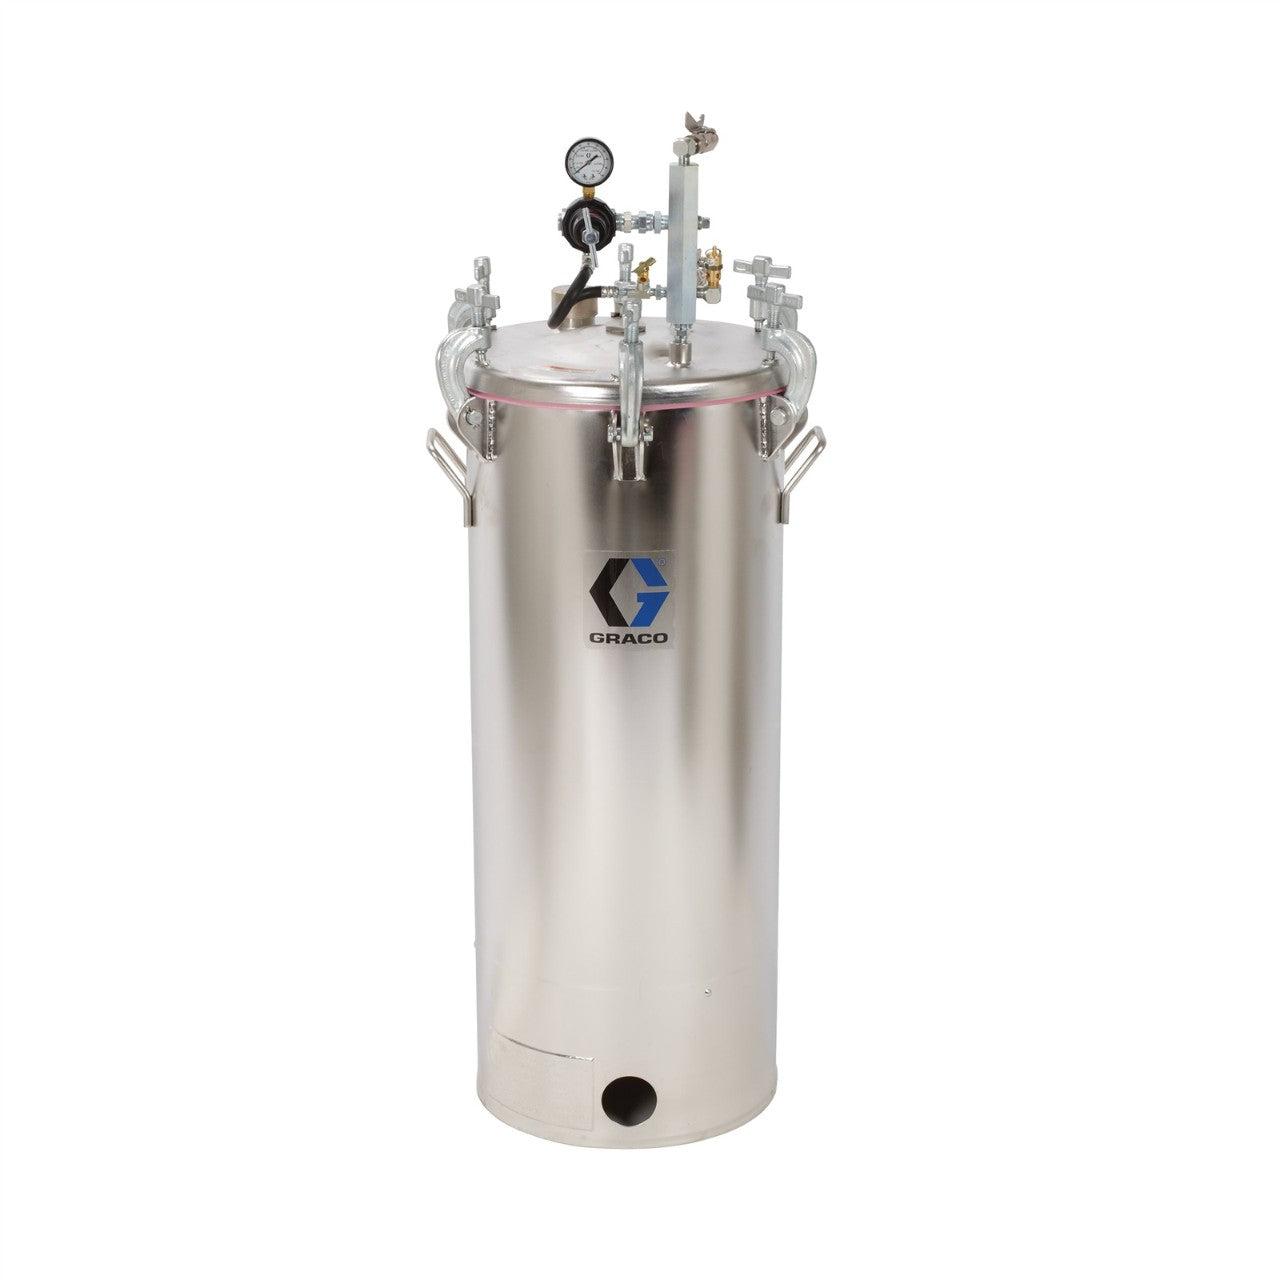 15 Gallon High Pressure (HVLP) Pot, Regulated to 100 psi, ASME Rated, 44.6 in (113.2 cm), 92 lbs (42 kg), SST